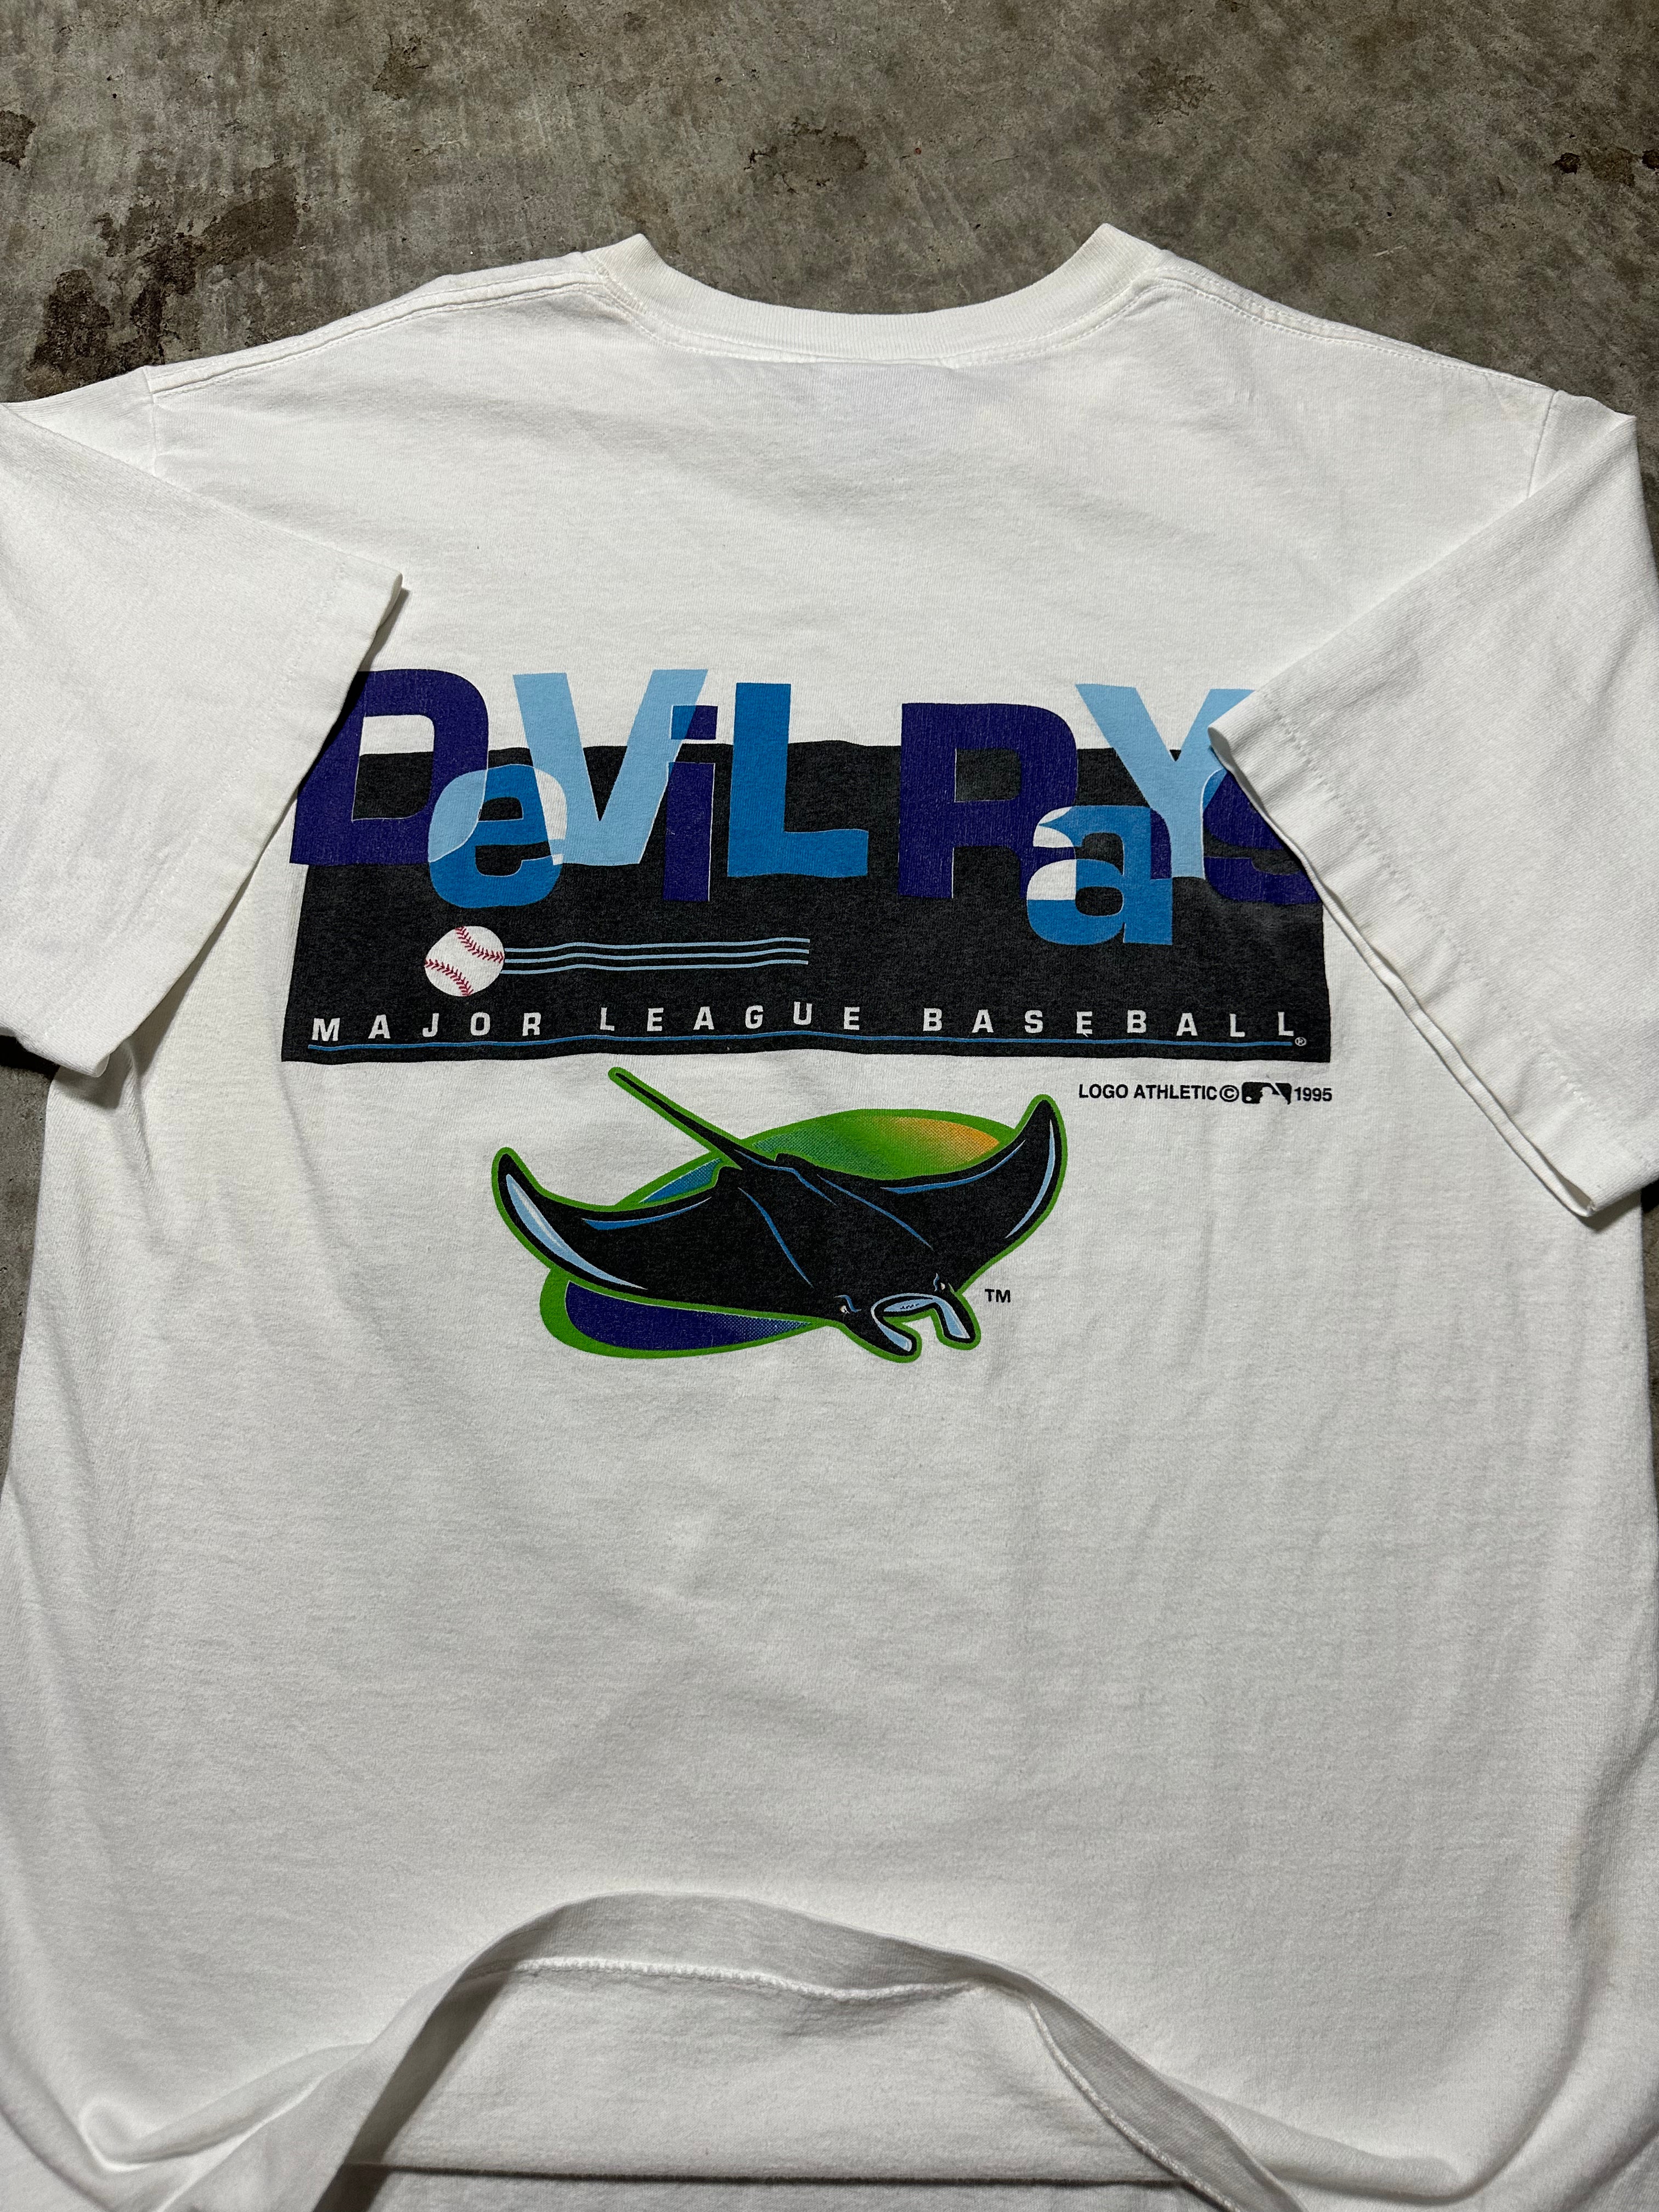 Vintage Tampa Bay Devil Rays Baseball More Than Just A Game T